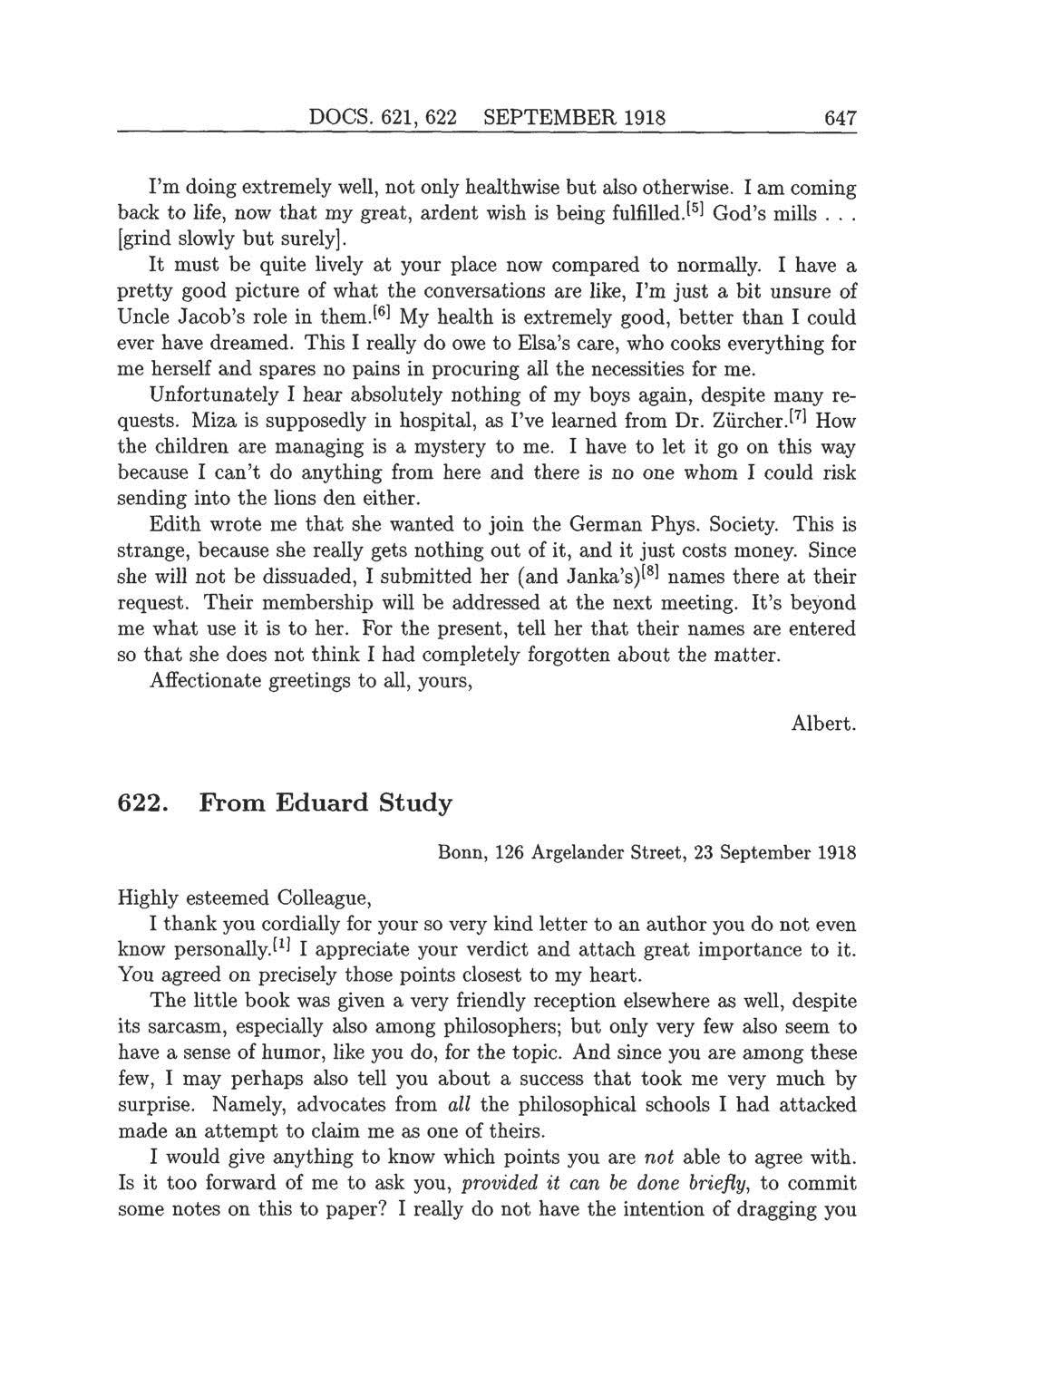 Volume 8: The Berlin Years: Correspondence, 1914-1918 (English translation supplement) page 647